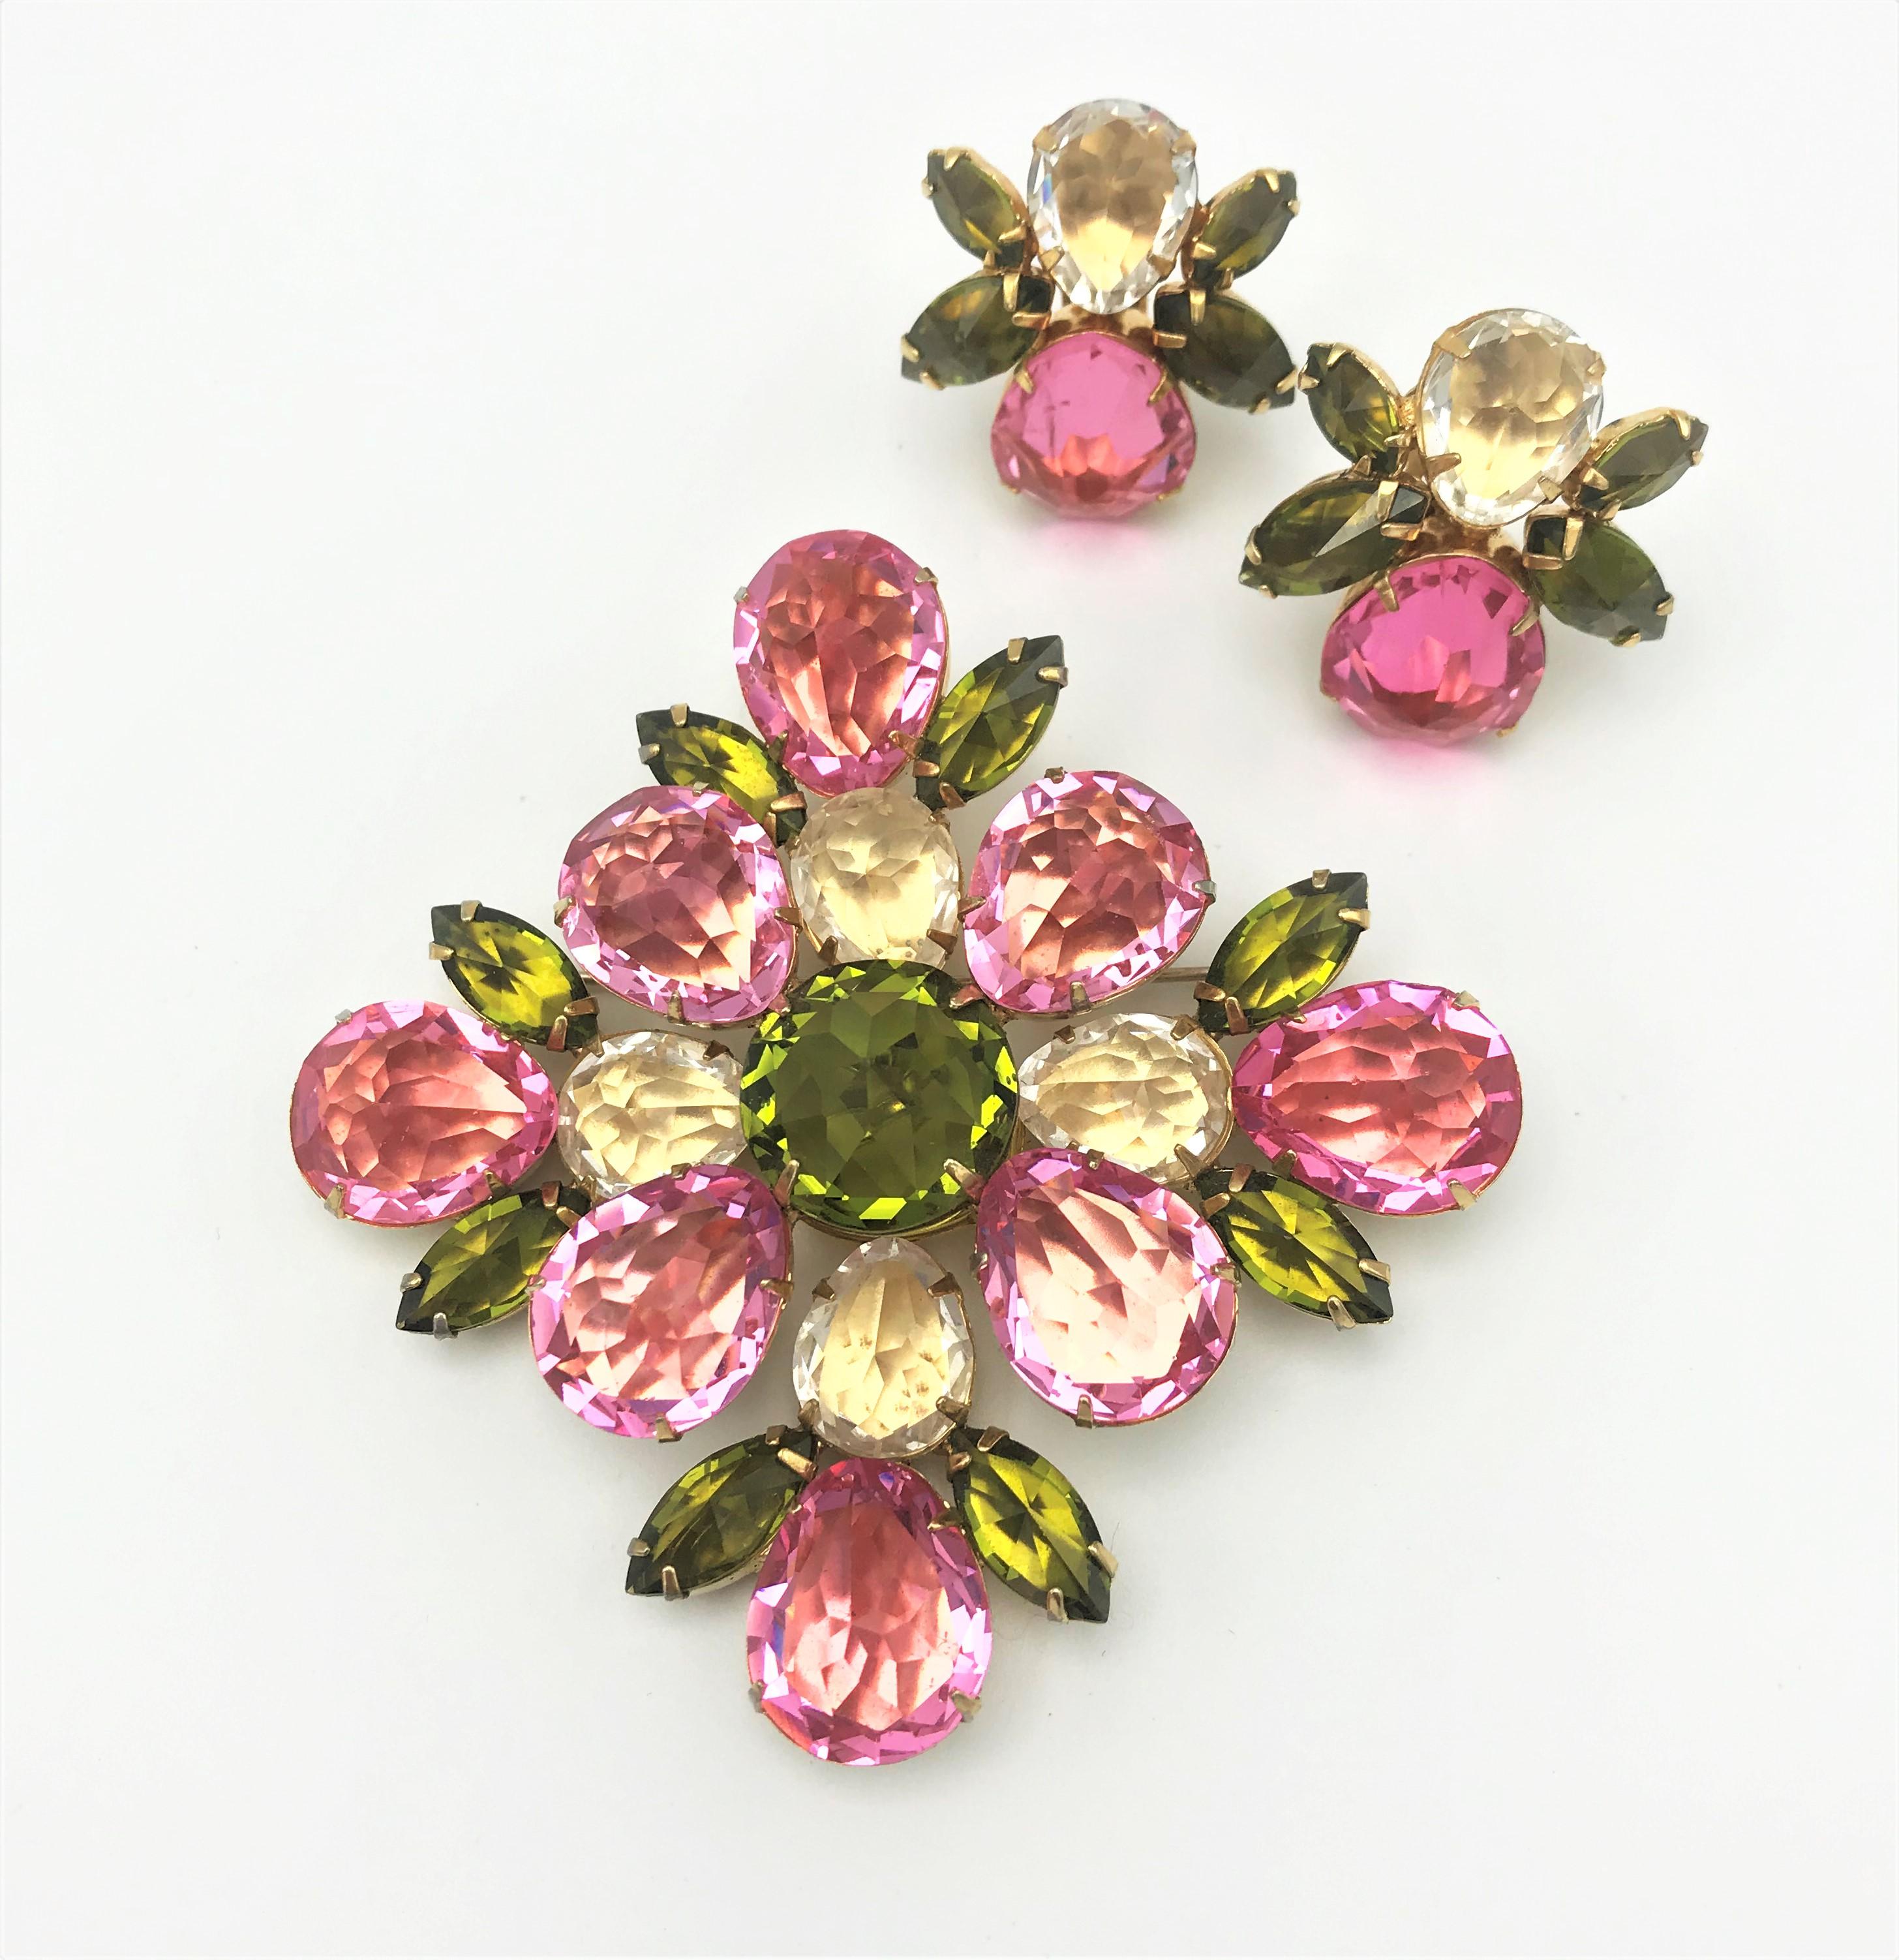 Wonderful brooch with large cut rhinestones in pink, olive green and clear. The matching ear clips in the same colors. Both pieces are signed 